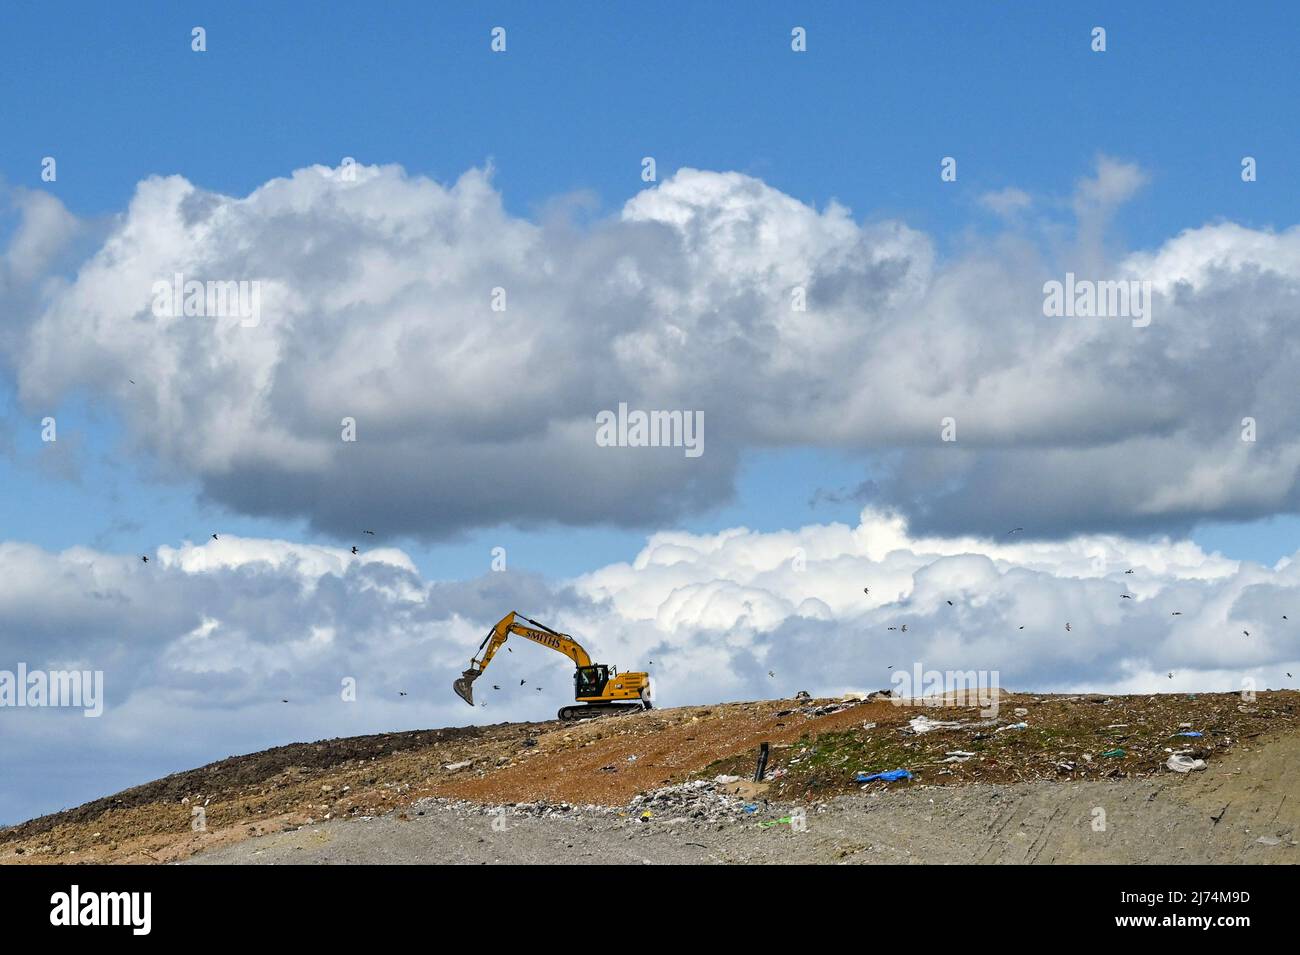 Swindon, England - April 2022: Mechanical digger working on a site for dumping and burying household waste. Stock Photo